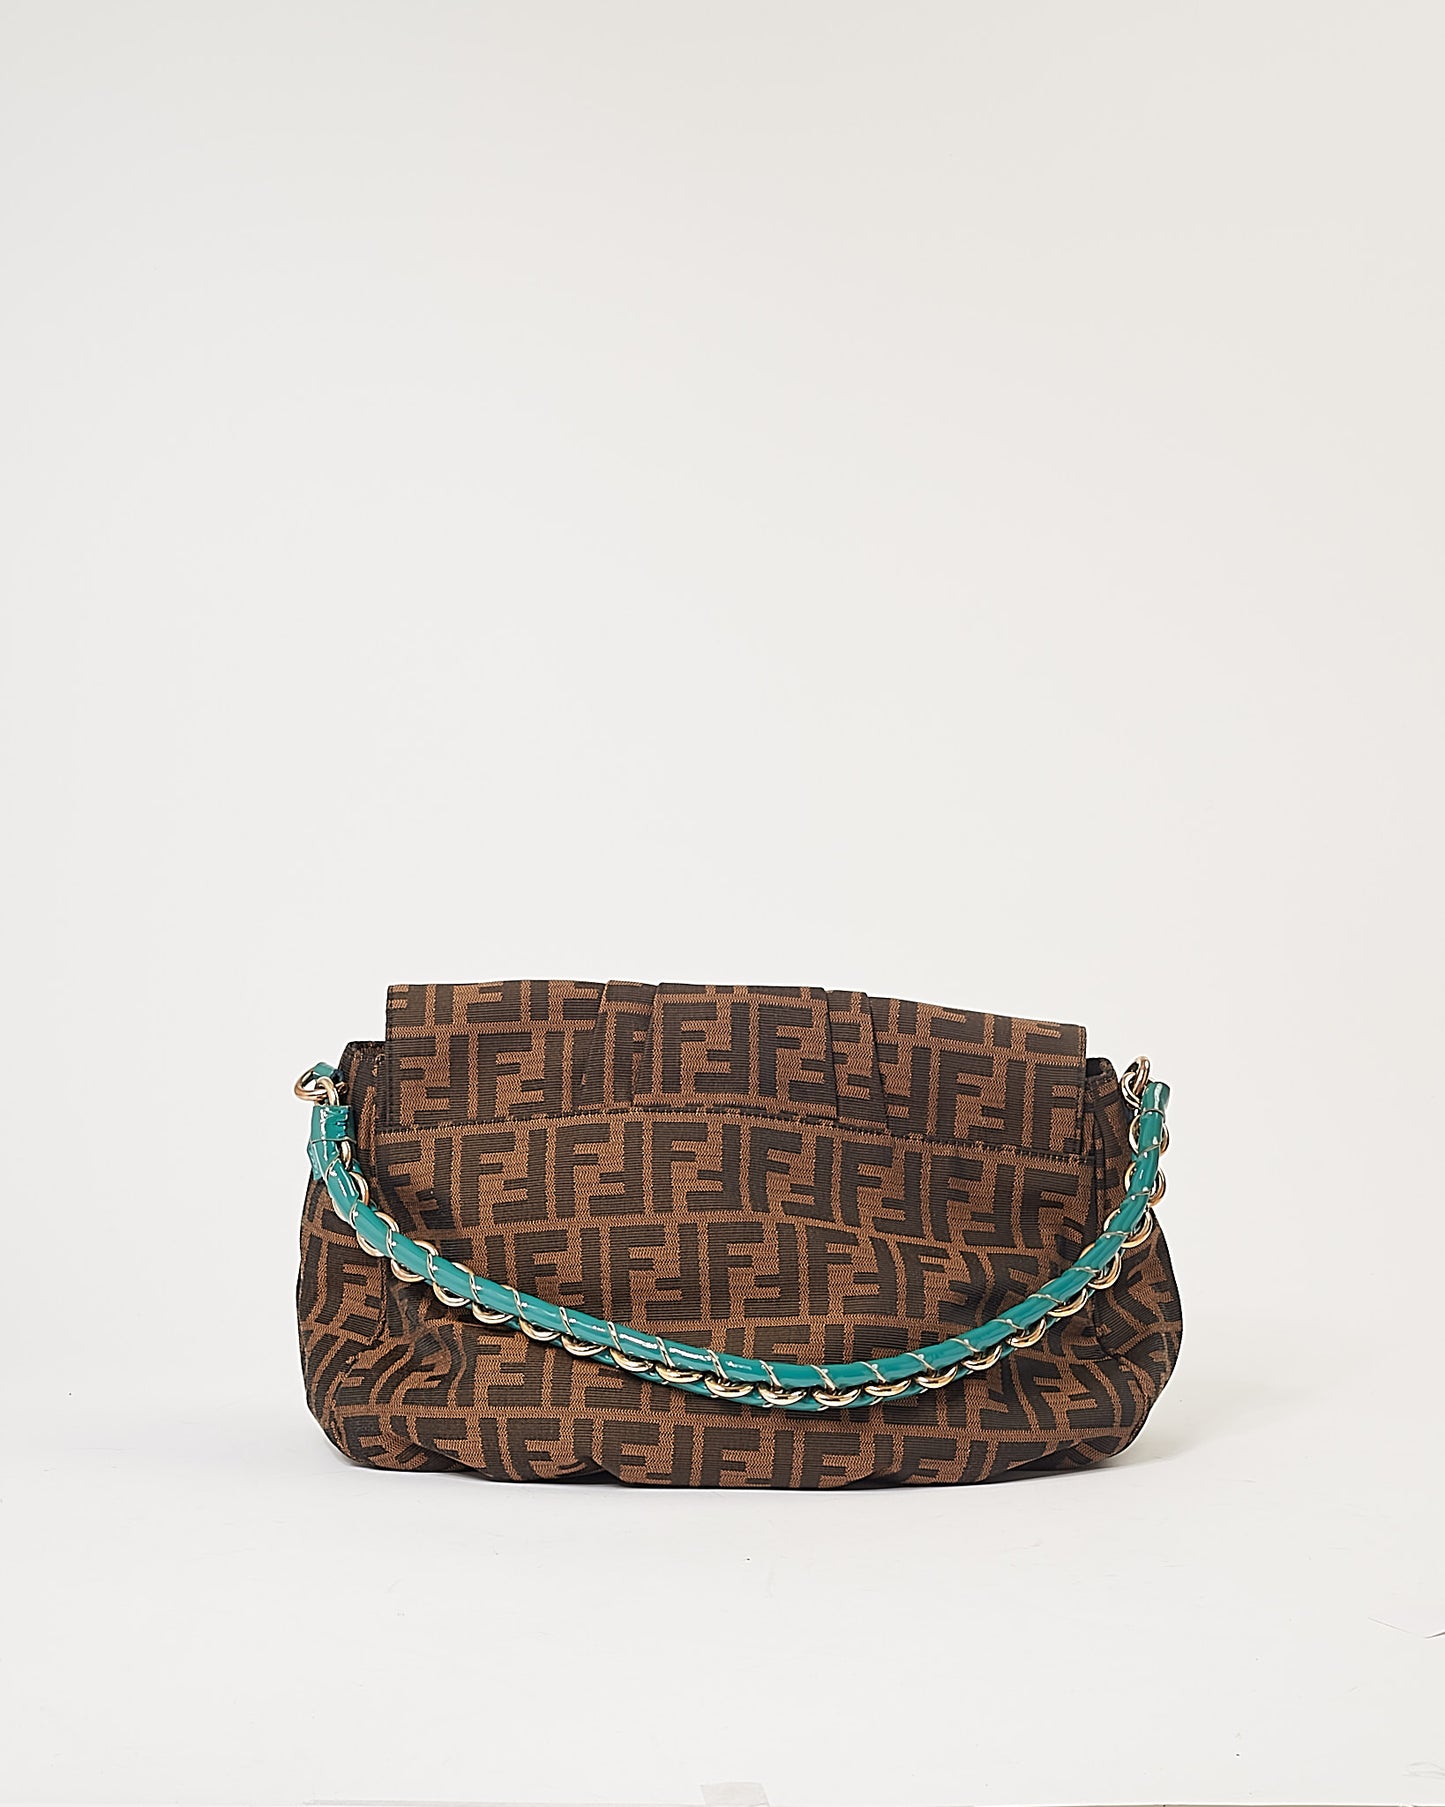 Fendi Zucca Canvas Turquoise Patent Leather Braided Mia Shoulder Bag